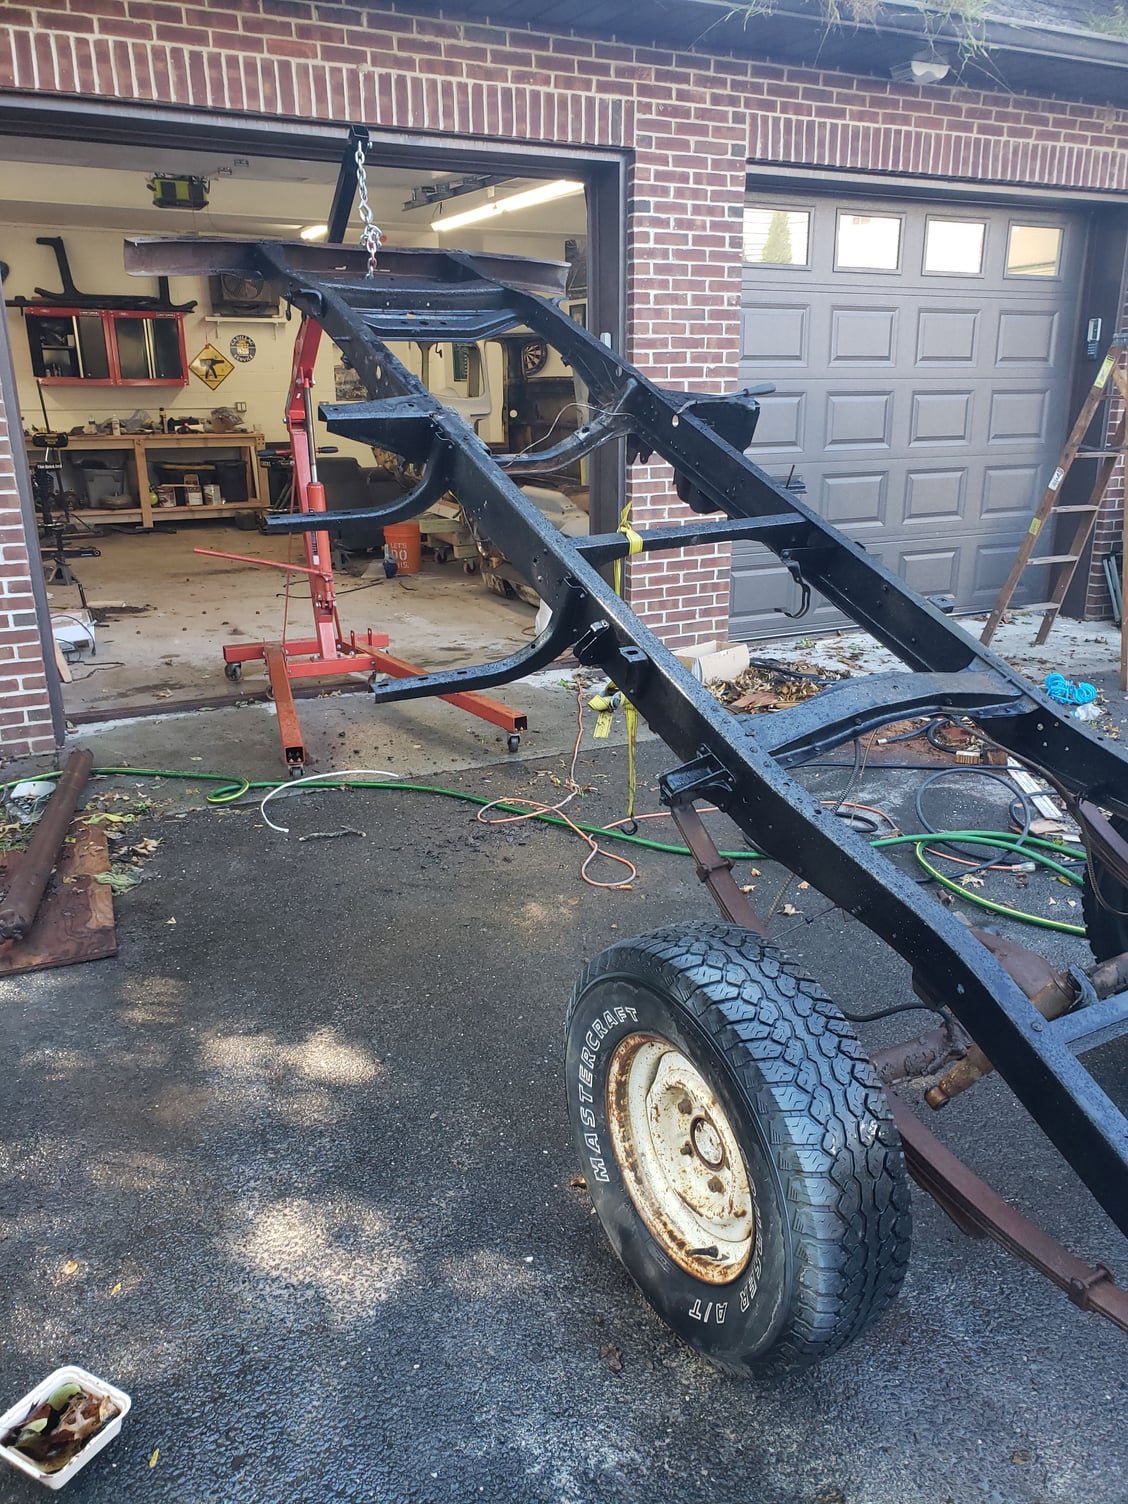 '56 f100 build thread - Page 2 - Ford Truck Enthusiasts Forums